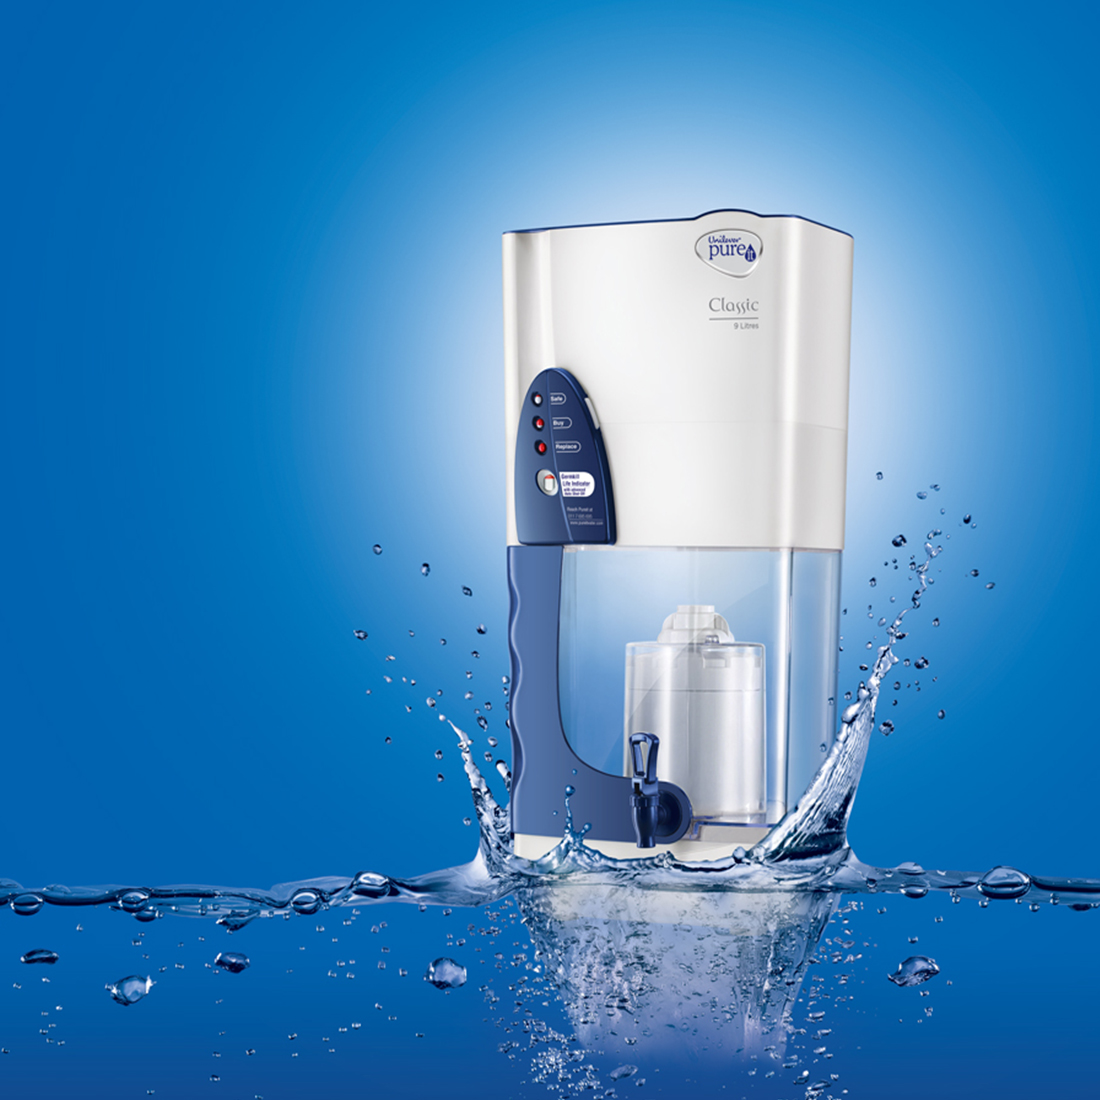 How Long Time does Pureit Classic Takes to Purify Water - BD Water